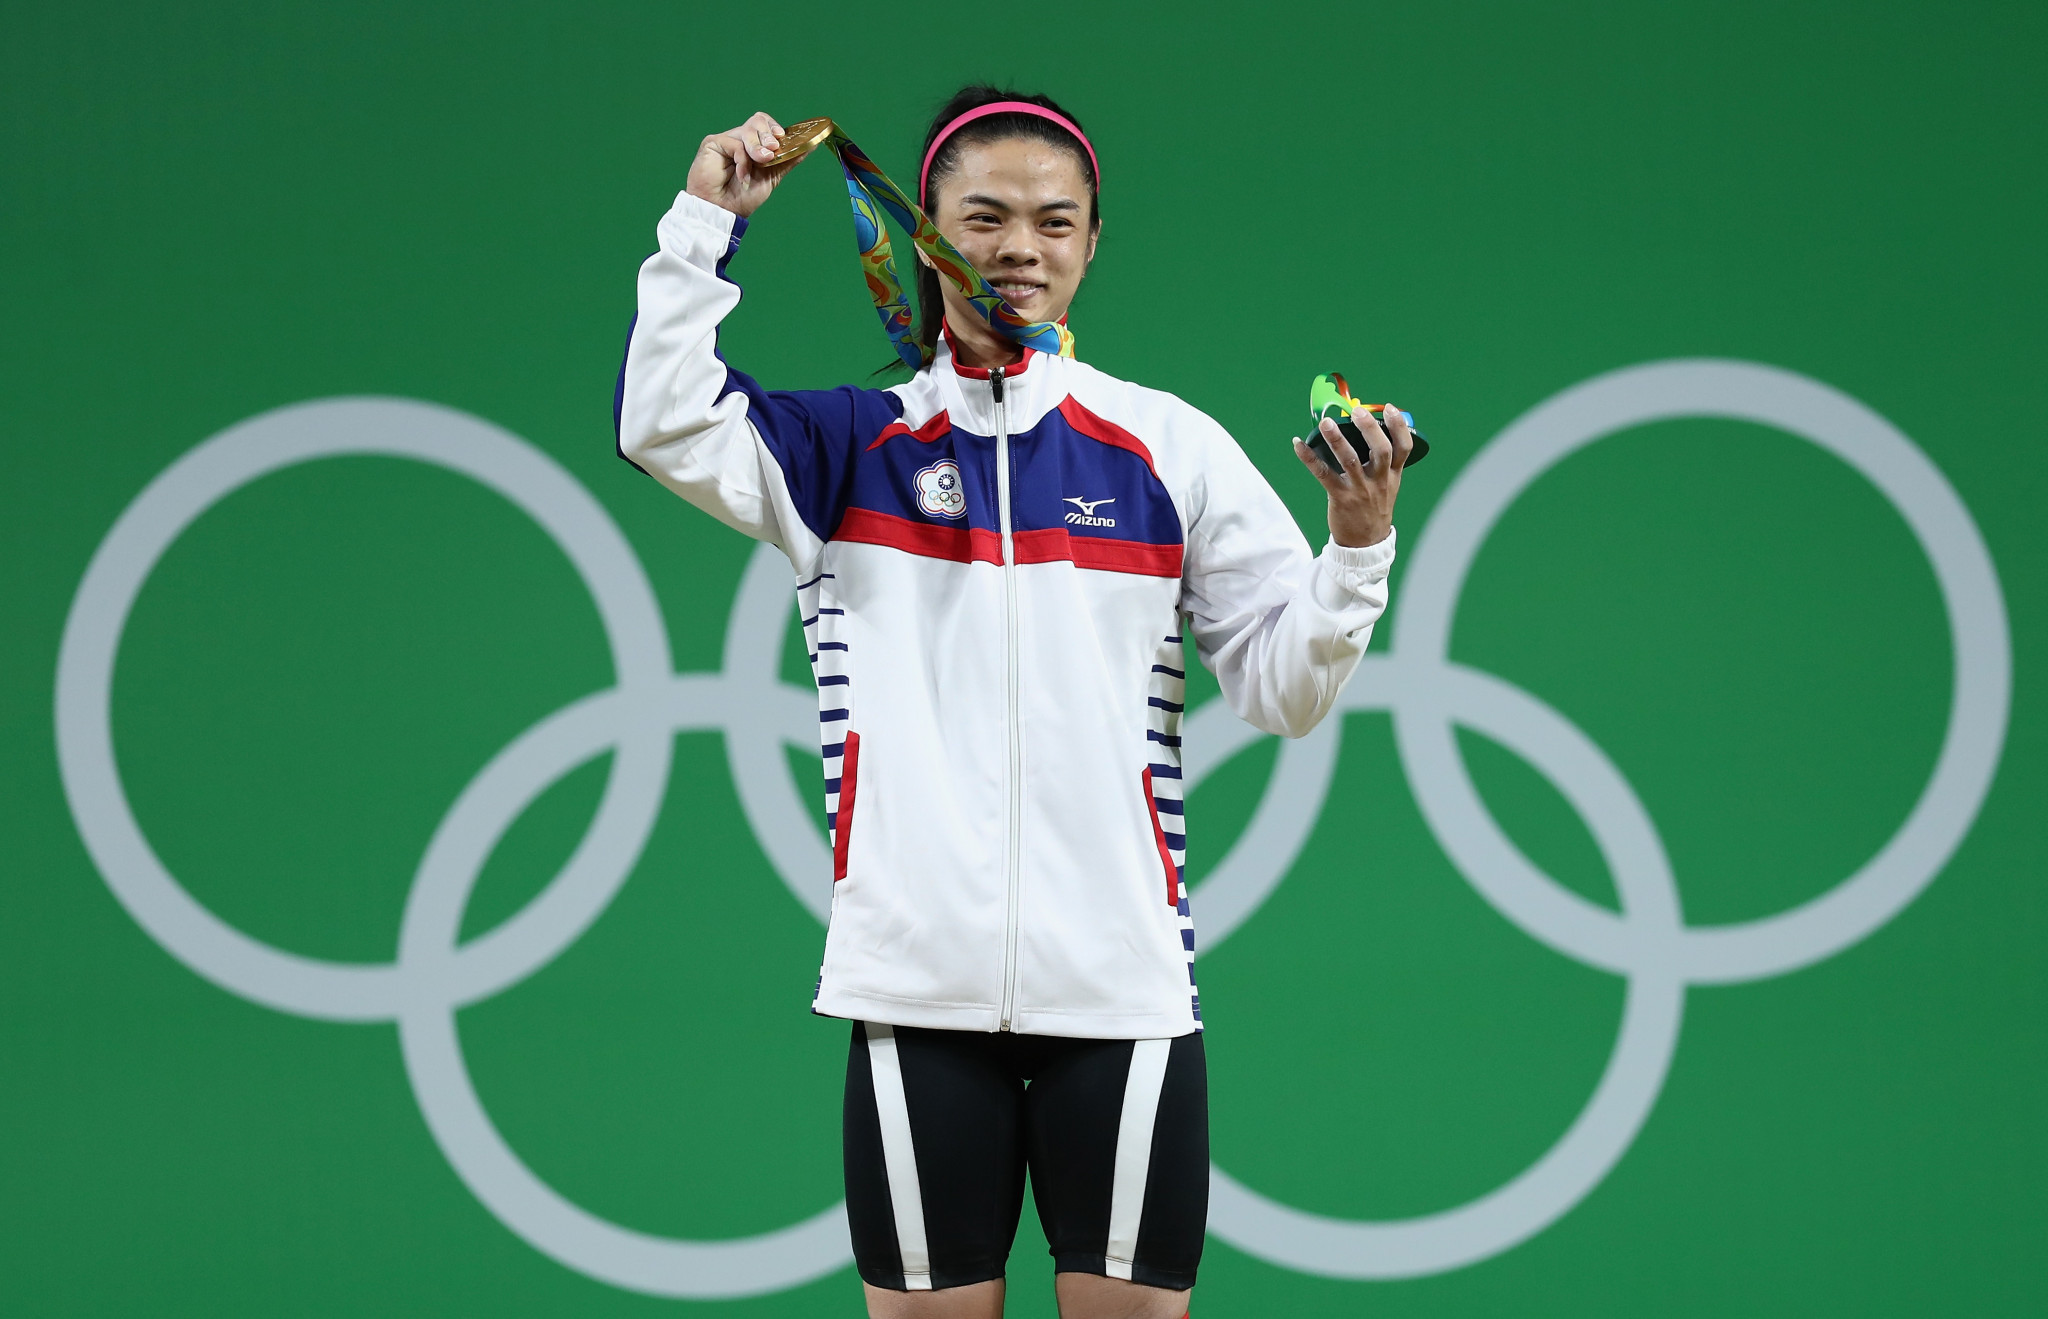 Chinese Taipei's Hsu Shu-ching won an Olympic gold medal gold in weightlifting at Rio 2016 ©Getty Images